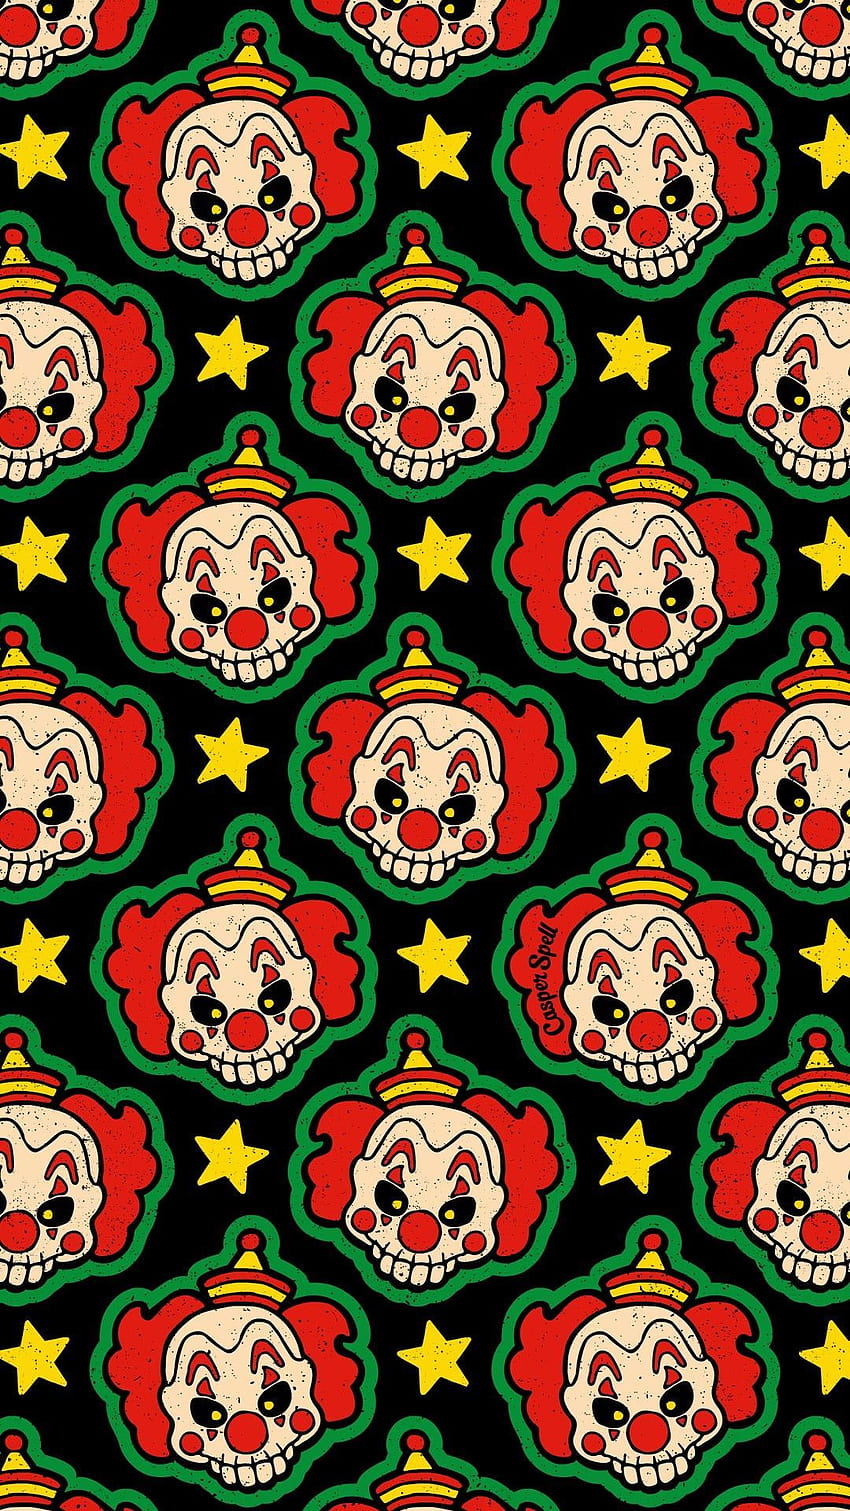 Clownin around  Clowncore wallpapers made by me using Canva 